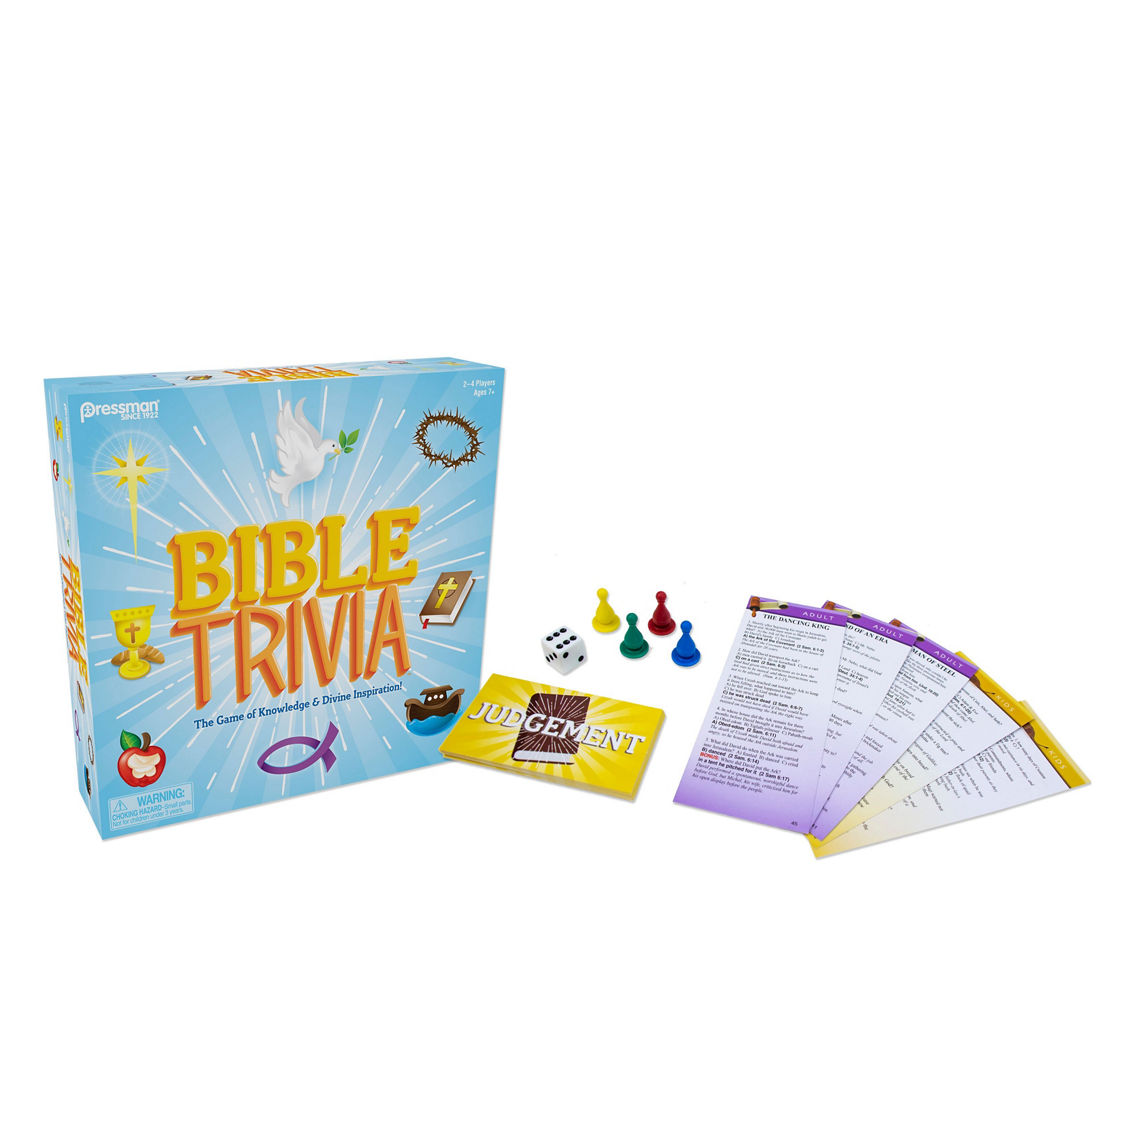 Pressman Toy Bible Trivia - The Game of Knowledge & Divine Inspiration! - Image 2 of 5